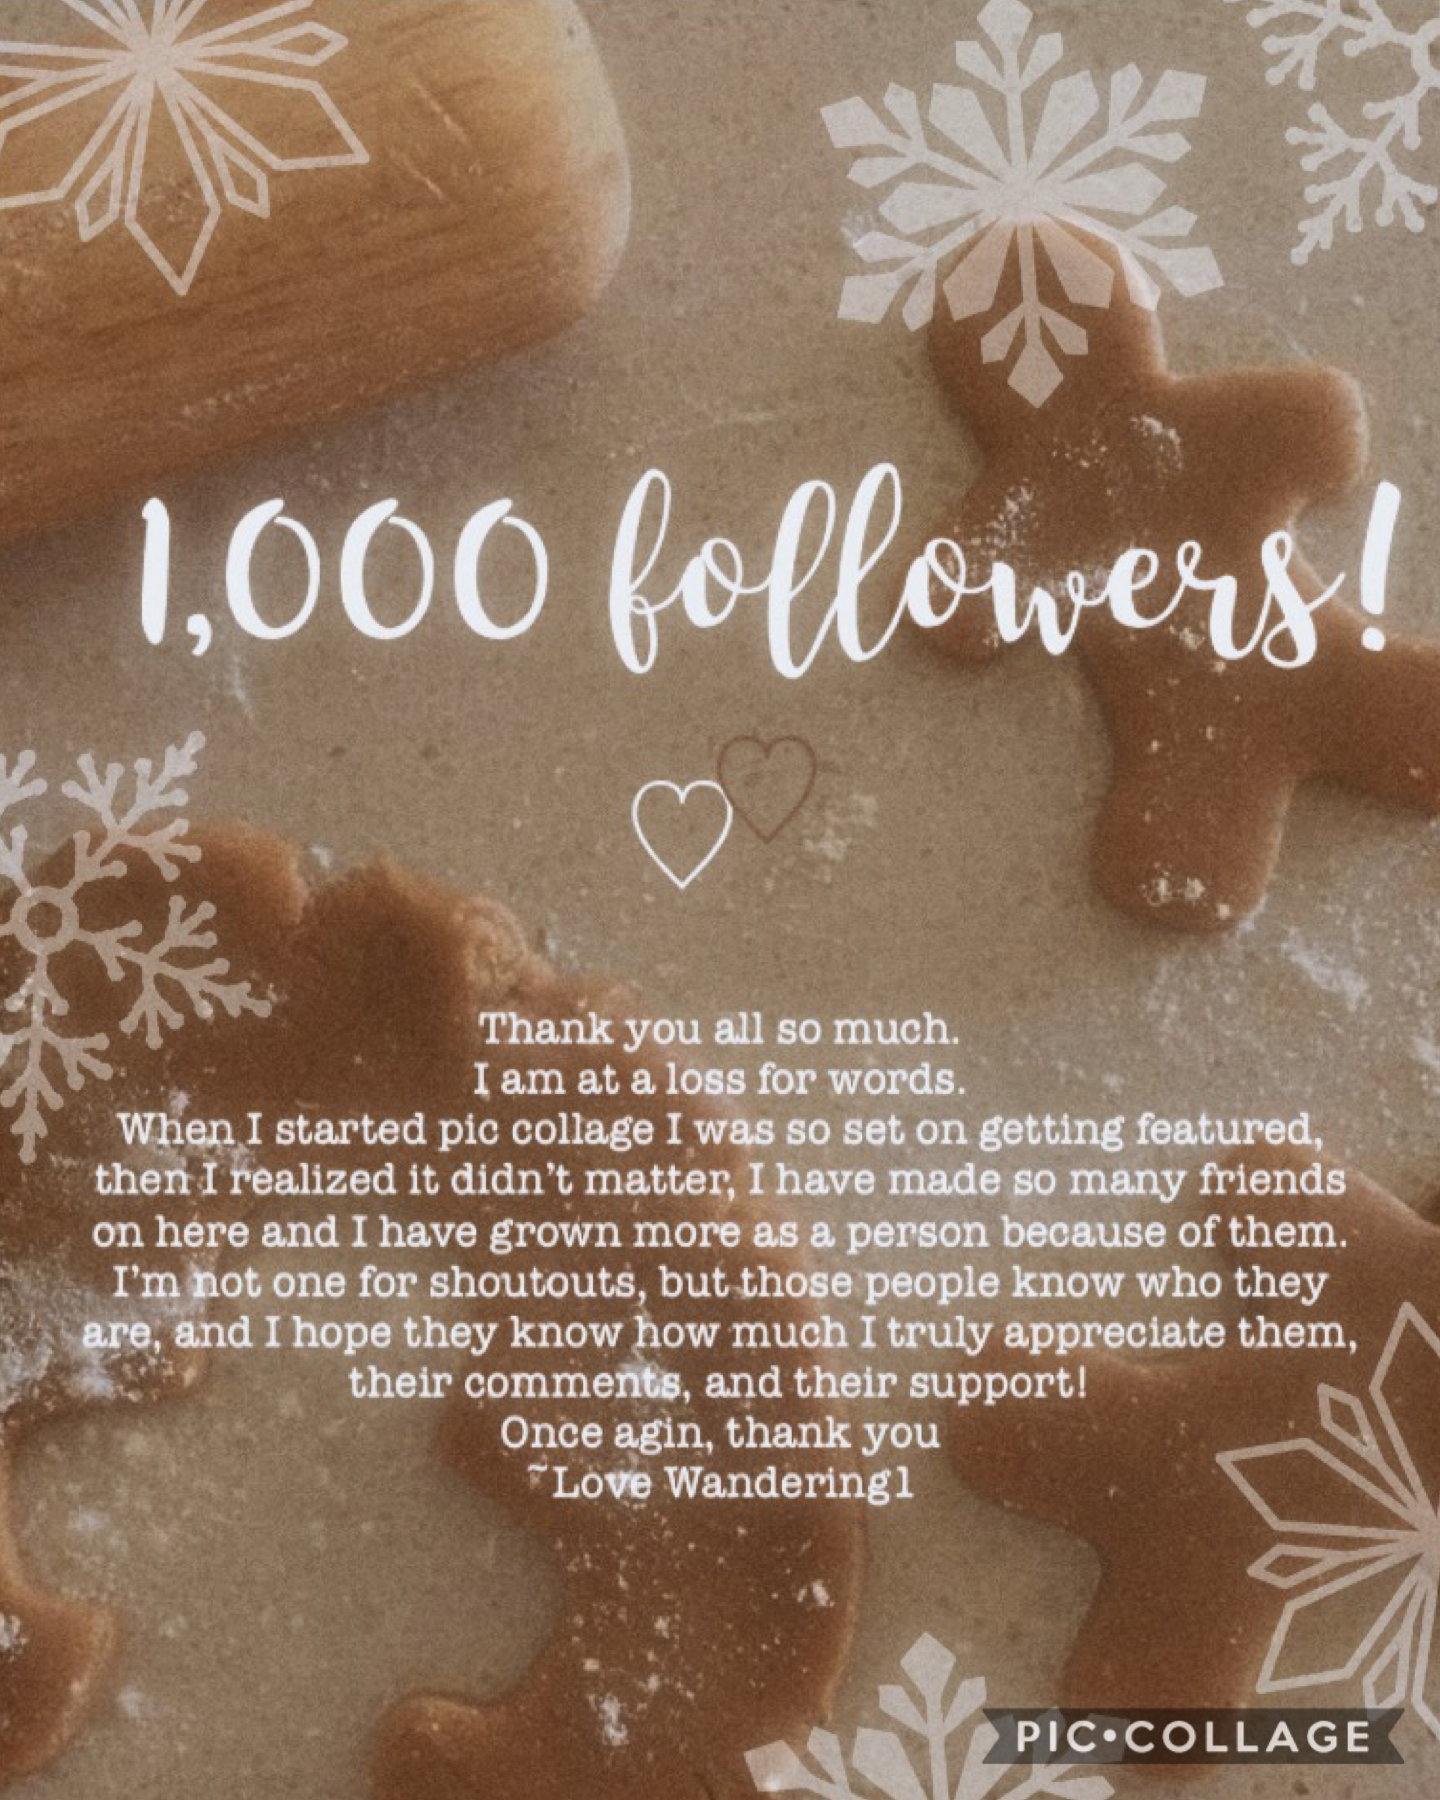 ❄️1k❄️
I cannot believe that I’m at 1,000 followers, that’s a lot of people 🥸
Thank you guys so much🥰
🥧🦌🎄Happy holidays 🎄🍪🥛
Info on the guest appearances in remixes soon!!

🥸🥸🥸🥸🥸🥸🥸🥸🥸🥸🥸🥸🥸🥸🥸🥸🥸🥸🥸🥸🥸🥸🥸🥸🥸🥸